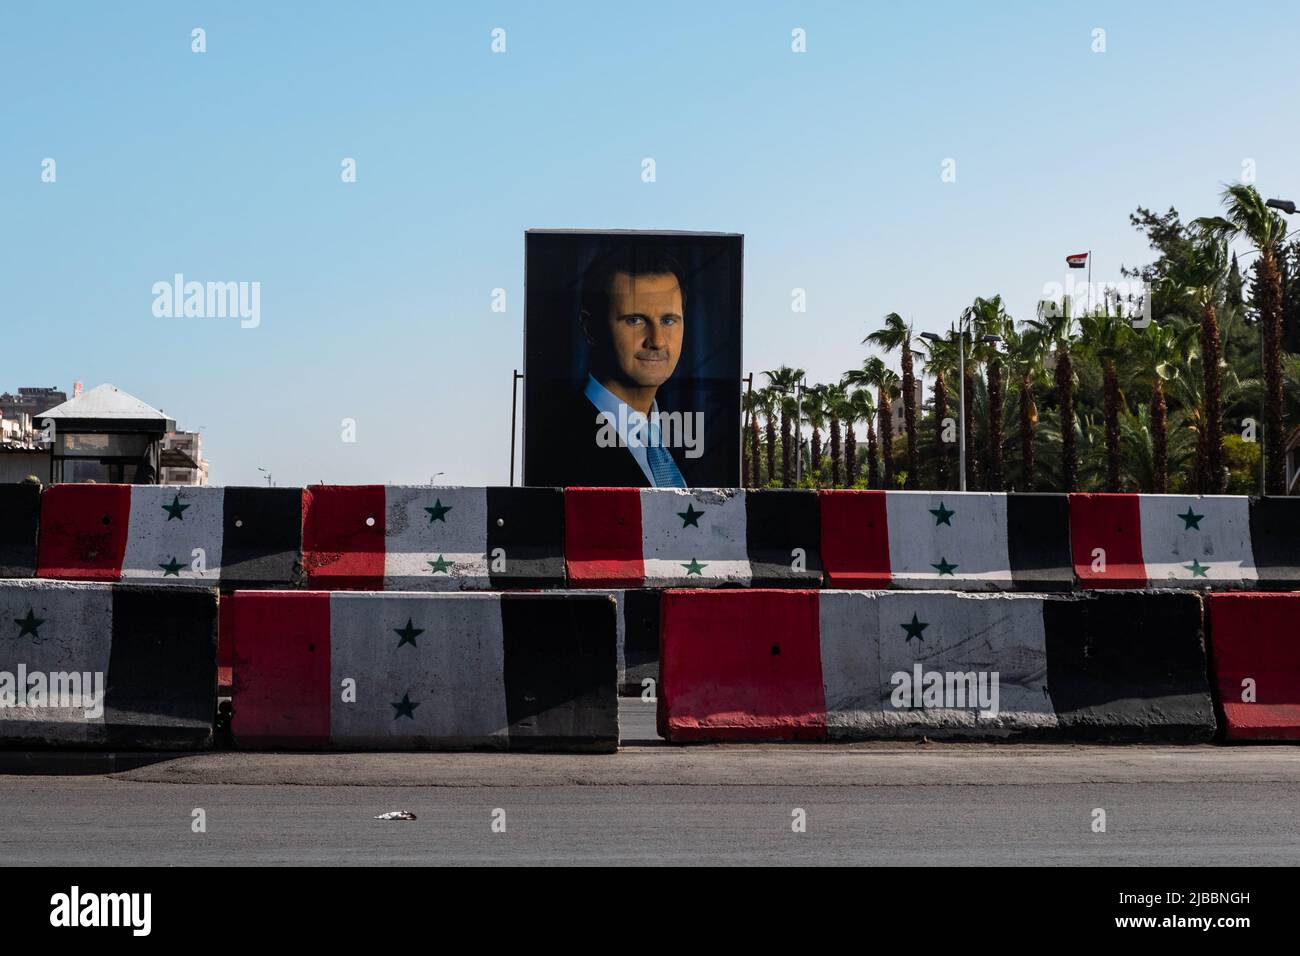 Damascus, Syria -May, 2022: Portrait image of Bashar al-Assad, President of Syria at checkpoint in Damascus Stock Photo